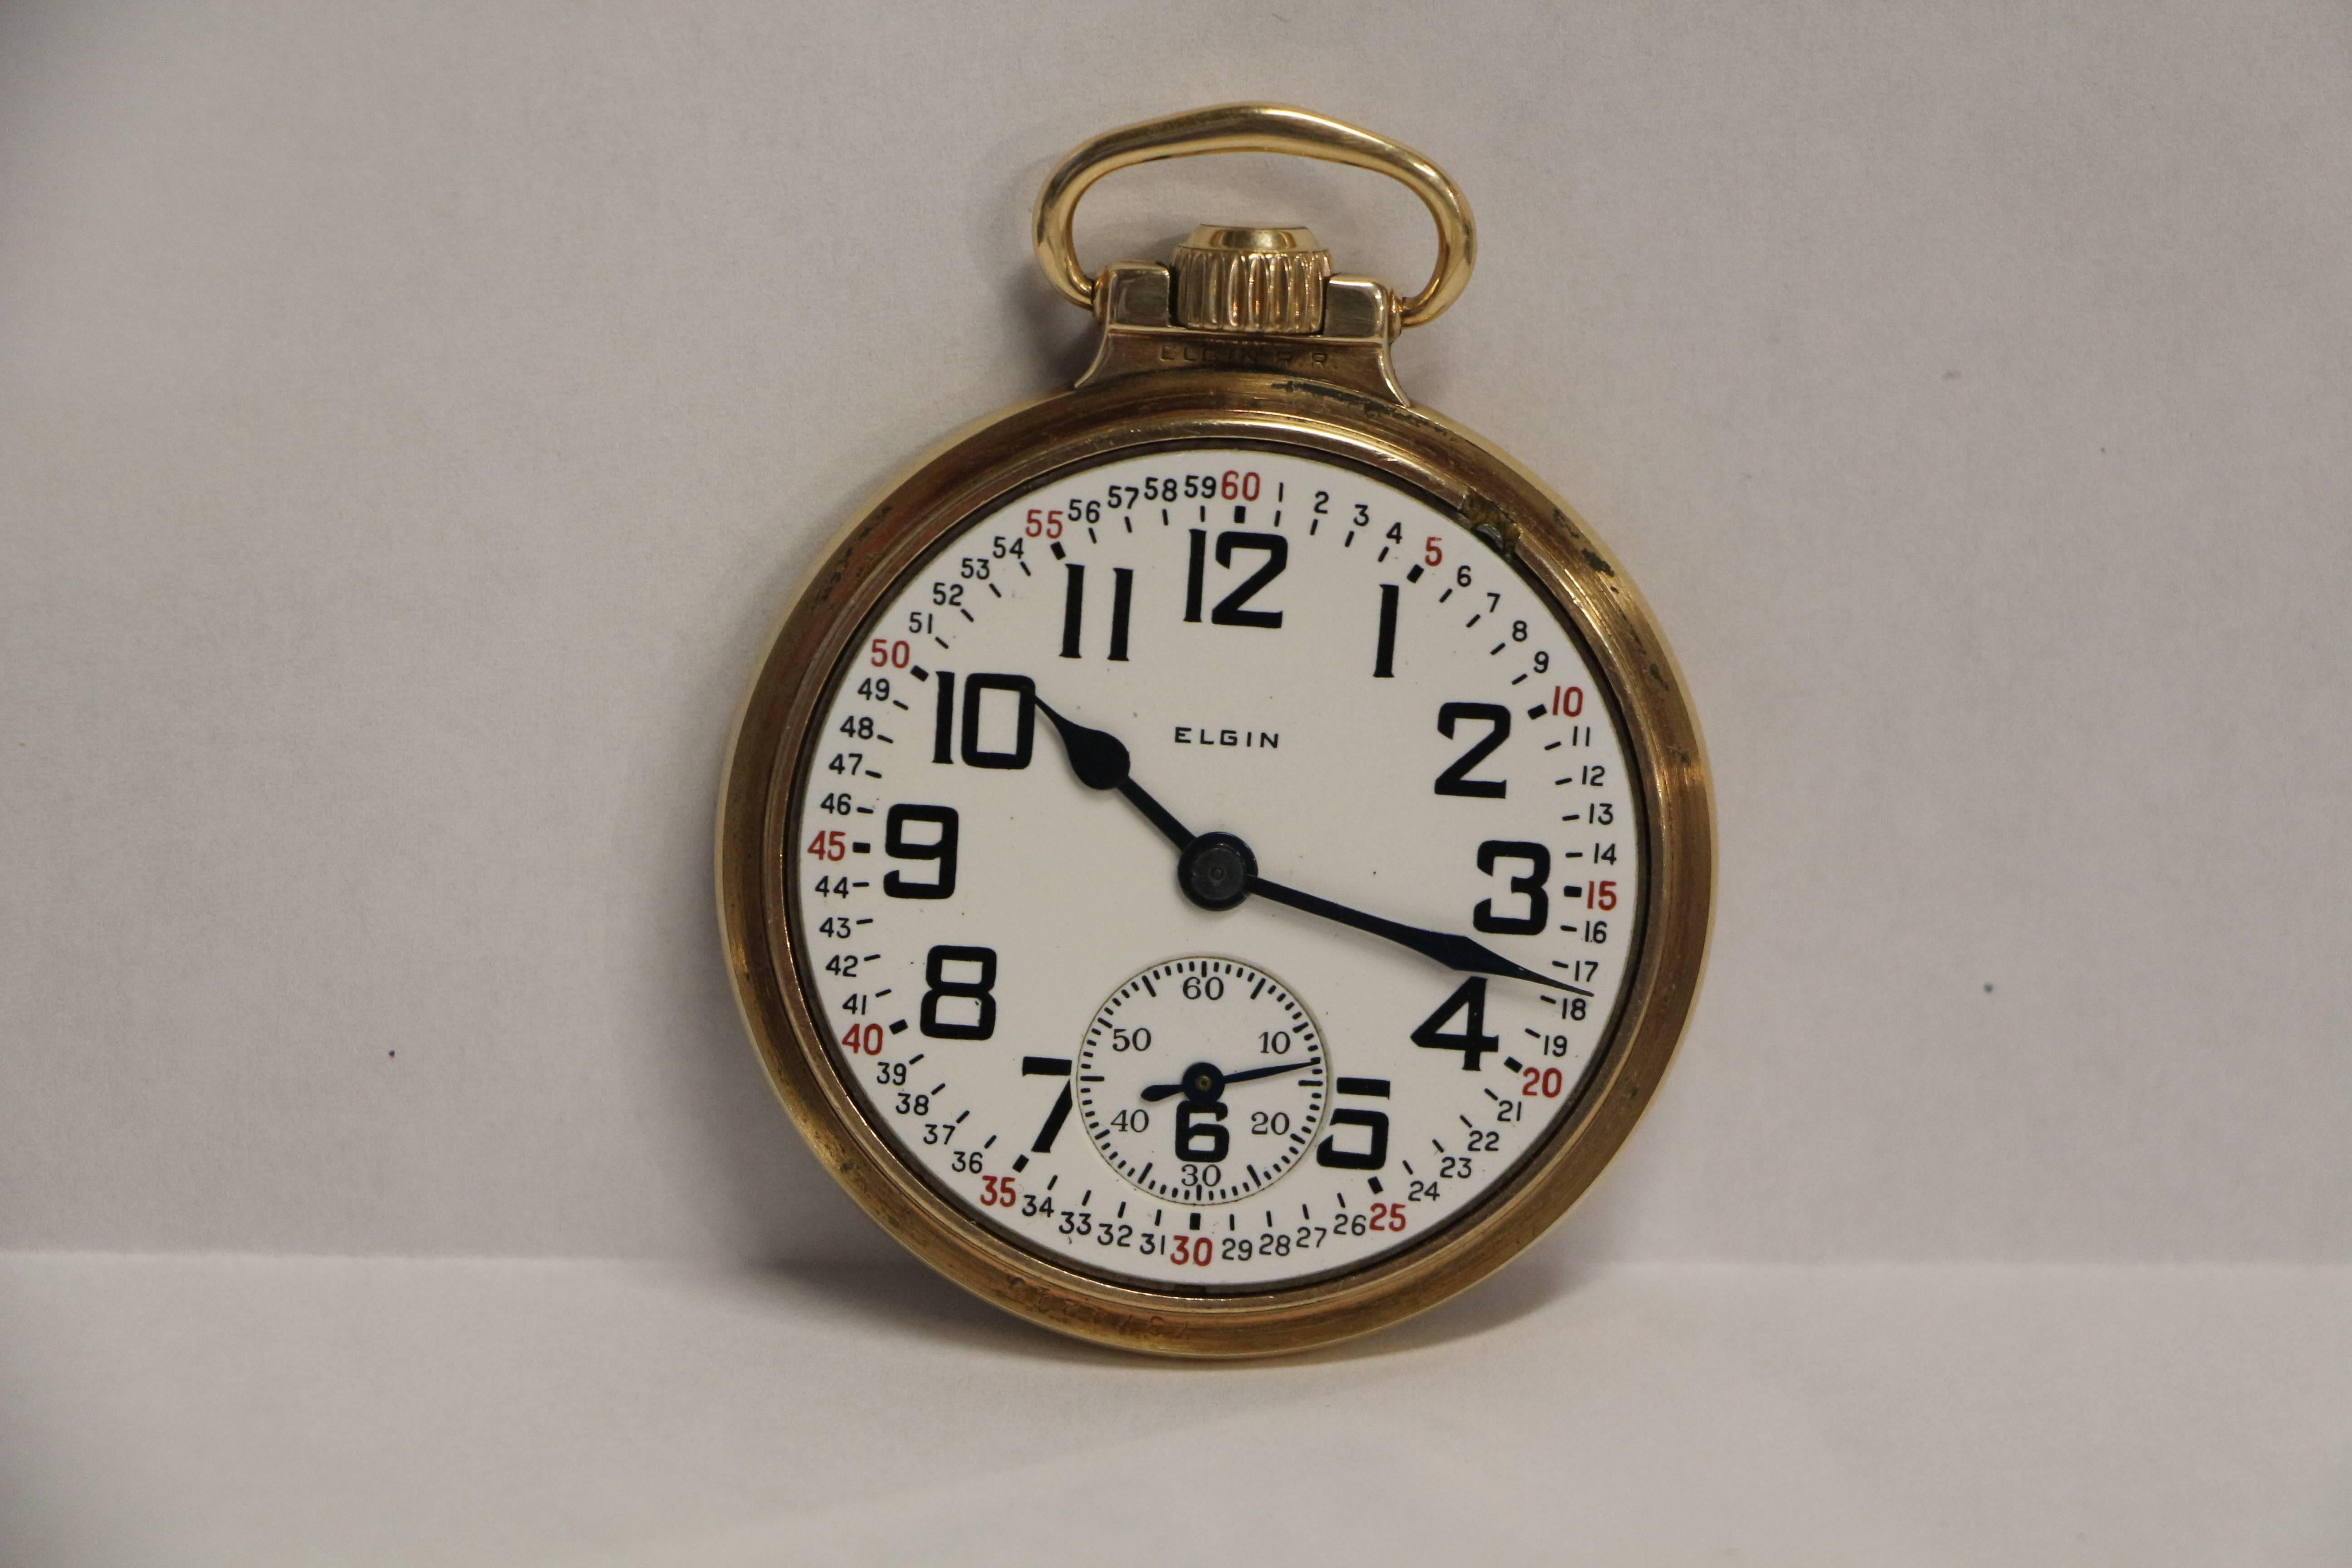 A nice running Elgin 21 jewel B.W. Raymond Railroad Grade pocket watch with a nice Montgomery Dial. Case is gold filled and marked under the crown Elgin R.R. I have not timed this watch but it seems to keep good time. The dial is in nice condition.